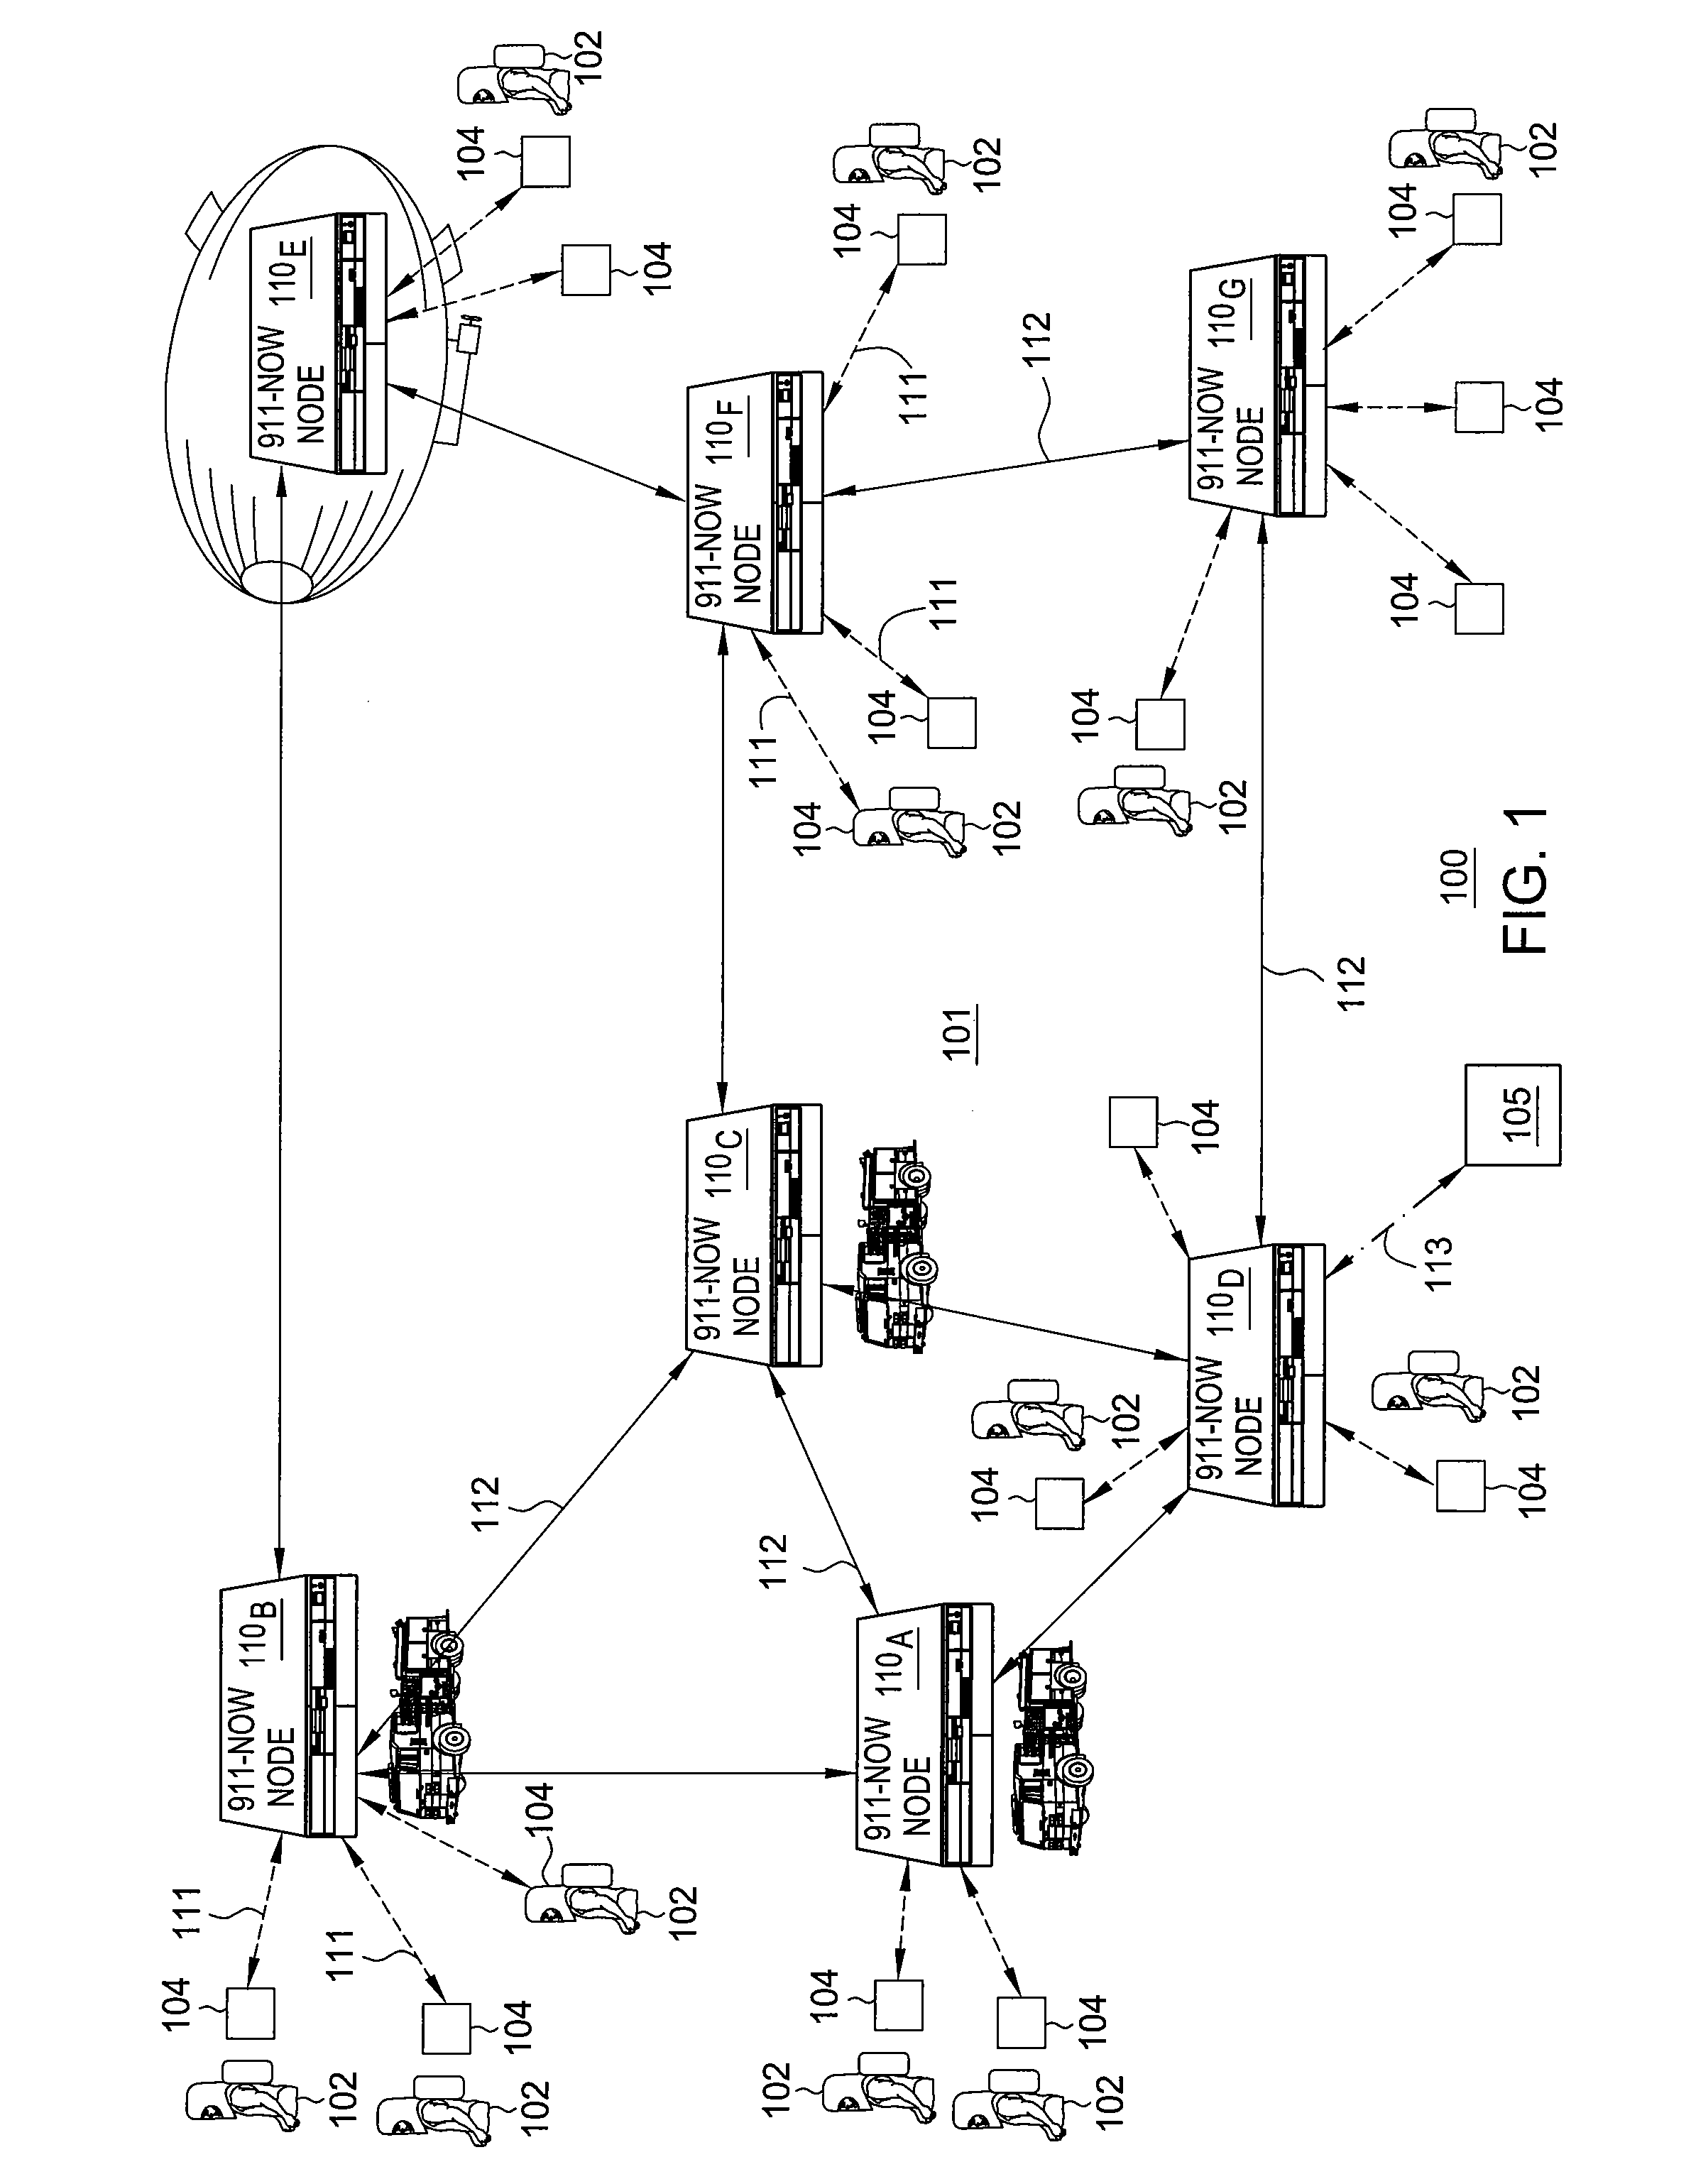 Method and apparatus for providing IP mobility and IP routing in ad hoc wireless networks